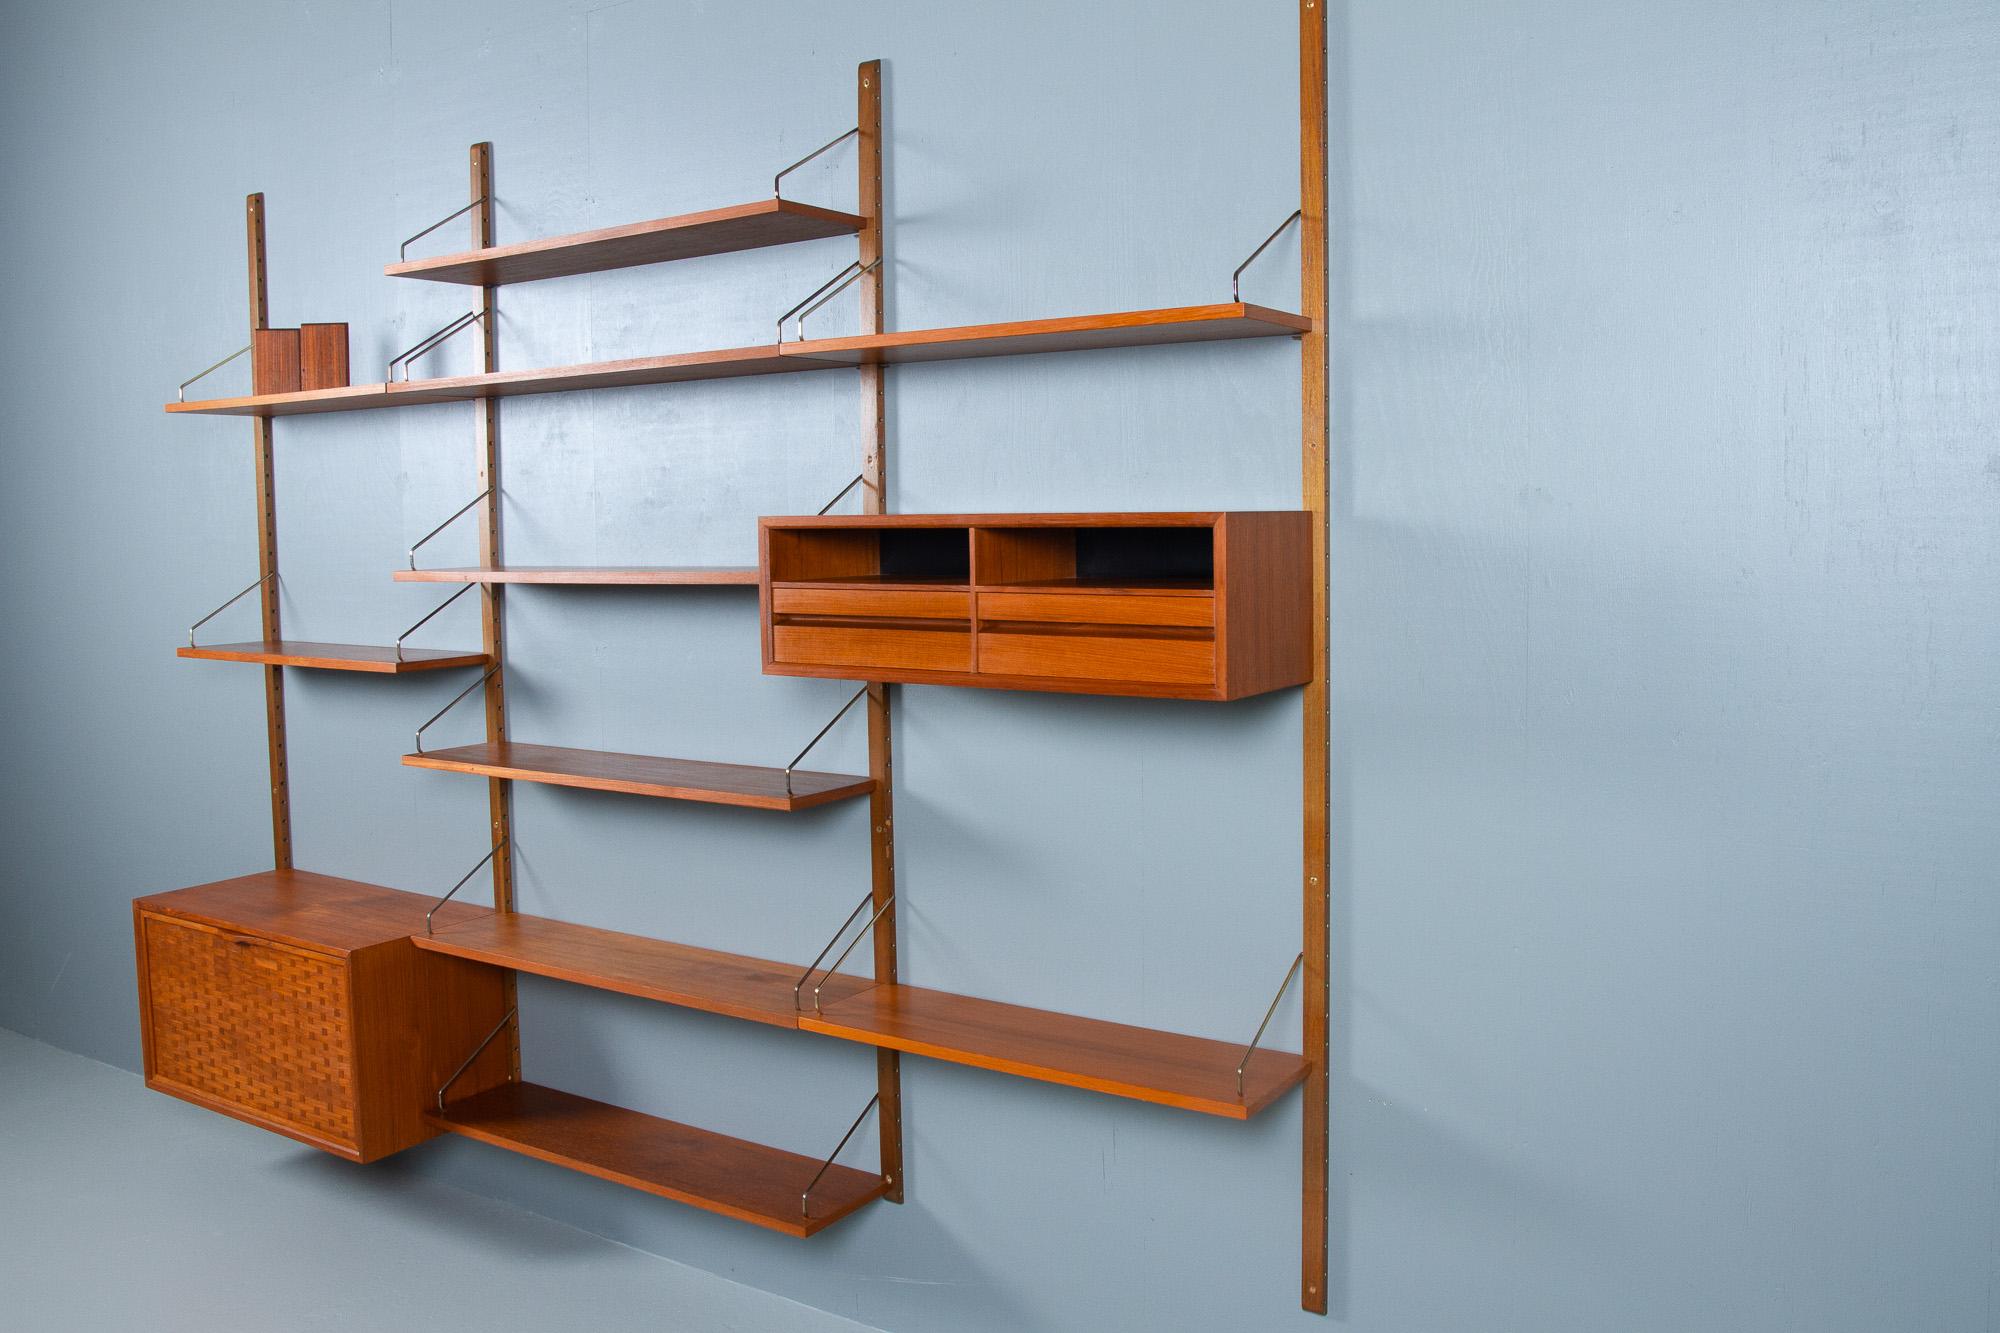 Vintage Danish teak wall unit by Poul Cadovius for Cado, 1960s.

Mid-Century Modern 3 bay shelving system model Royal. This is a original vintage floating bookcase designed in 1948 by Danish architect Poul Cadovius. 
Cadovius had the